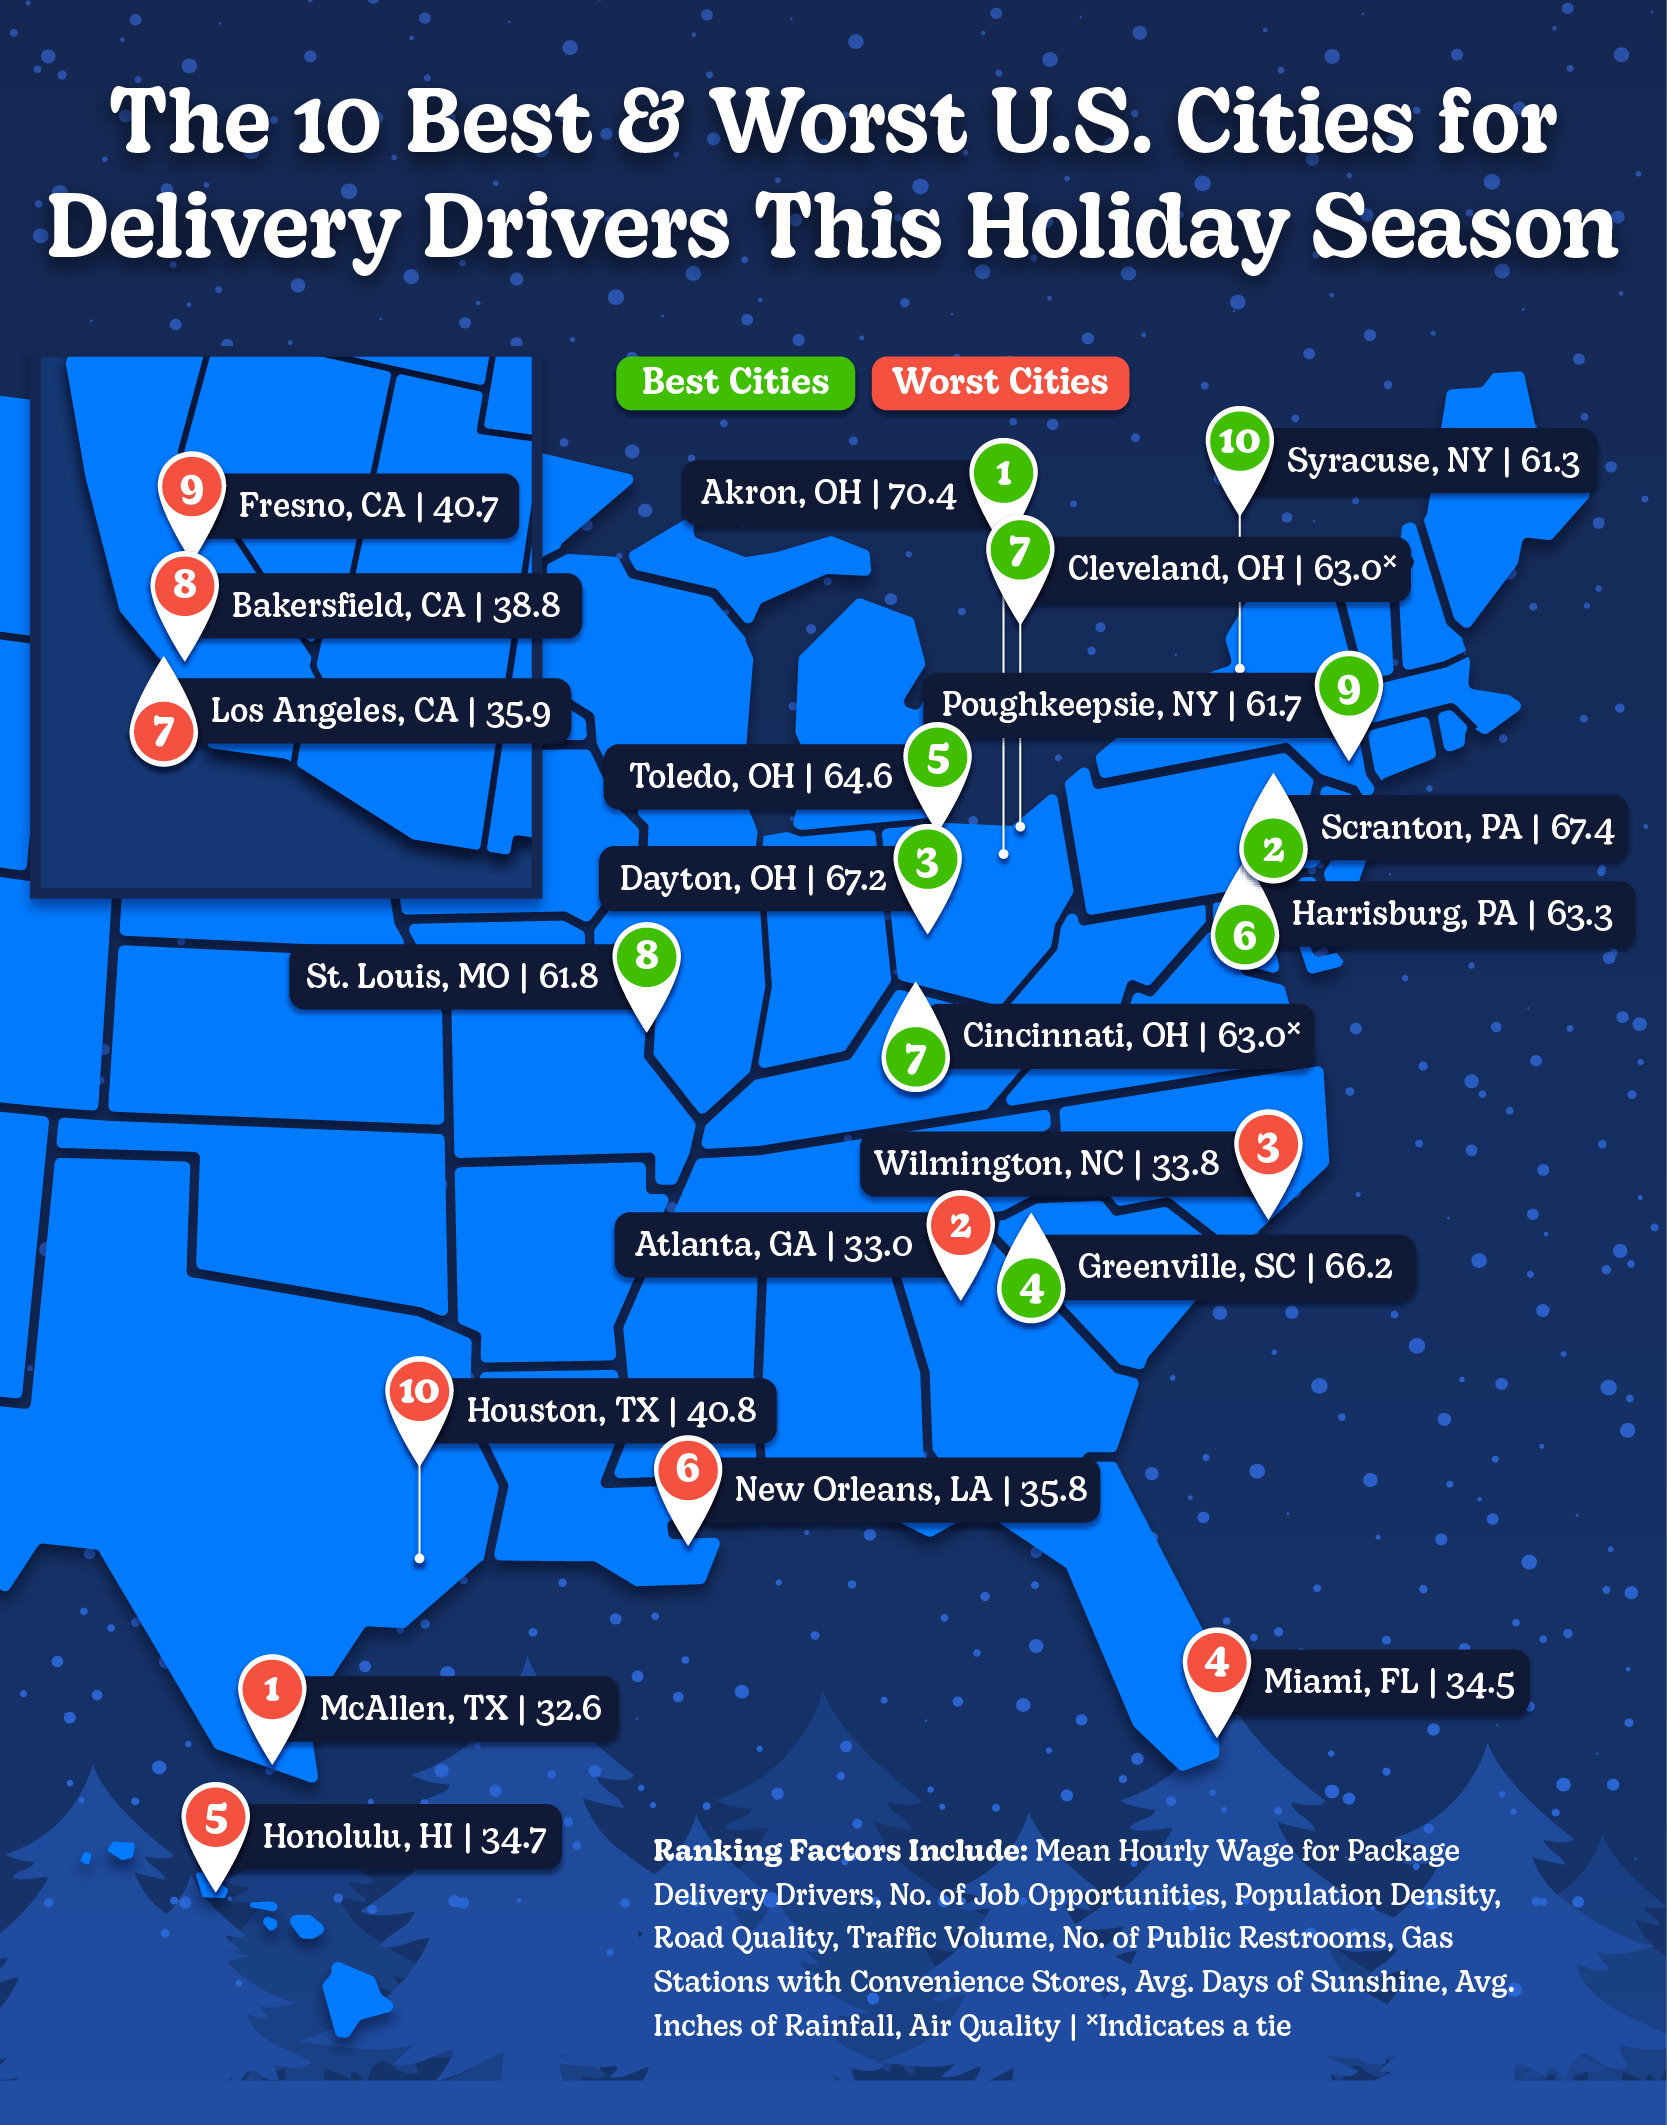 A map illustrating the 10 best and worst cities for delivery drivers for the holiday season.